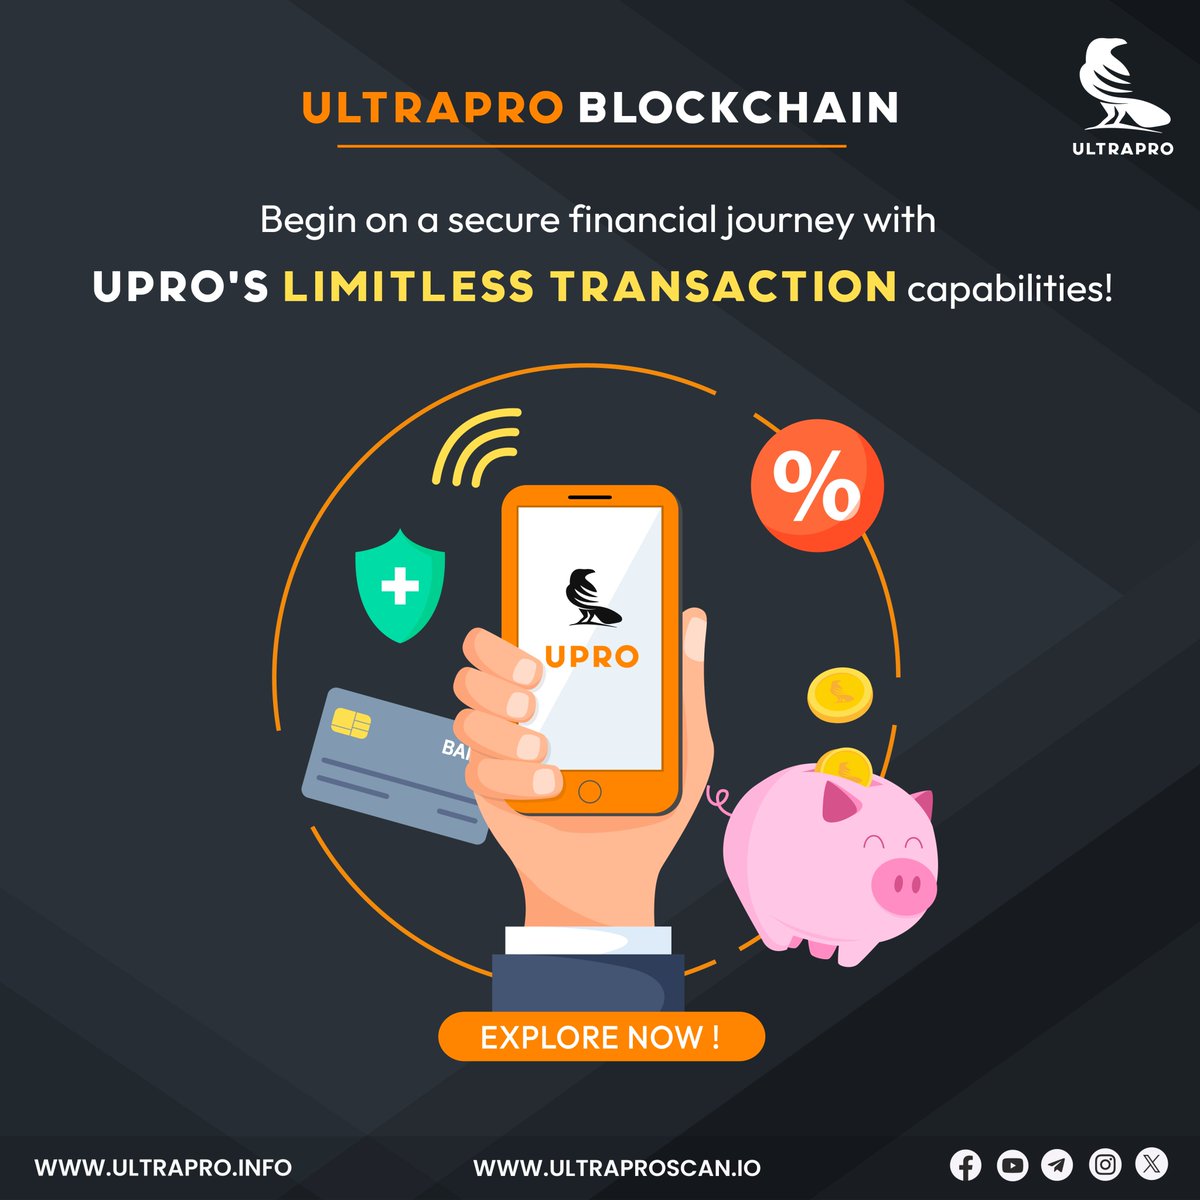 Start your money journey with #Upro! With unlimited #transactions and security, managing your #finances has never been easier.

🖥 For More Details :
ultrapro.info
ultraproscan.io

#Blockchain #cryptoprice #blockchainnews #SatoshiNakamotos49thBirthdayBash